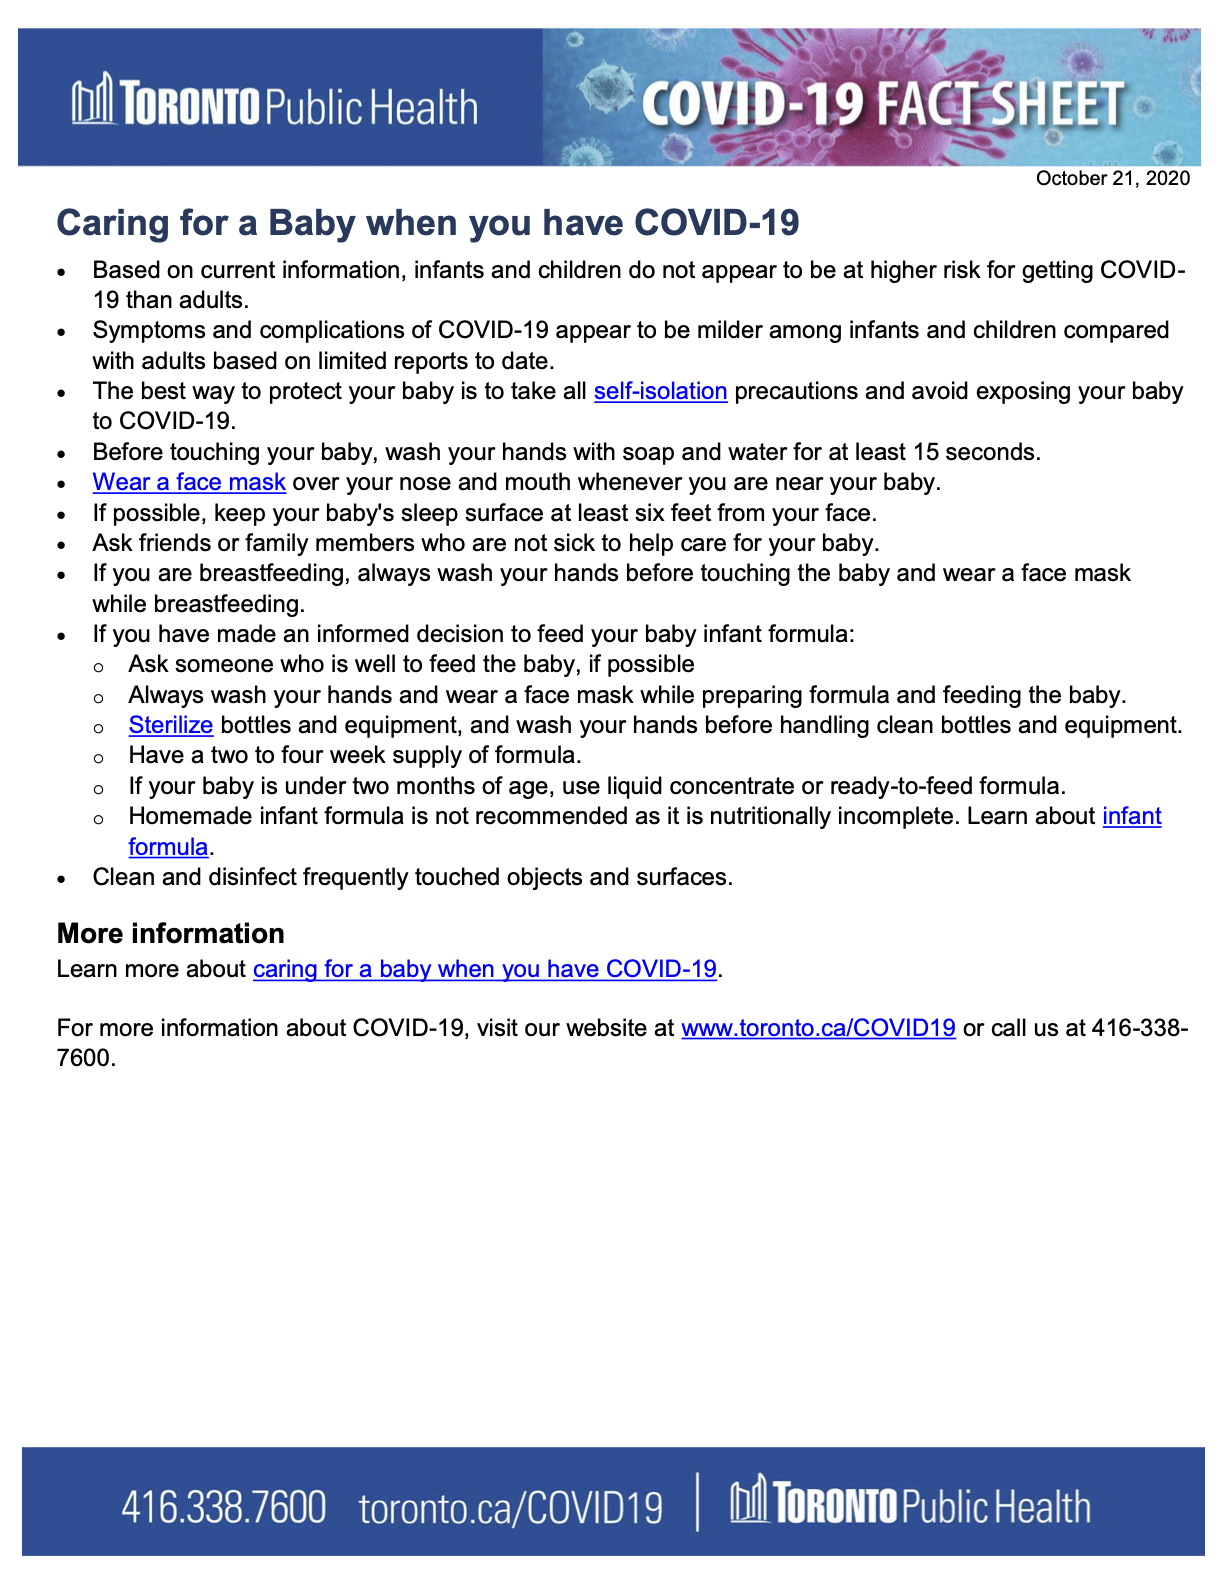 964e-Caring-for-a-baby-when-you-have-COVID-19.png